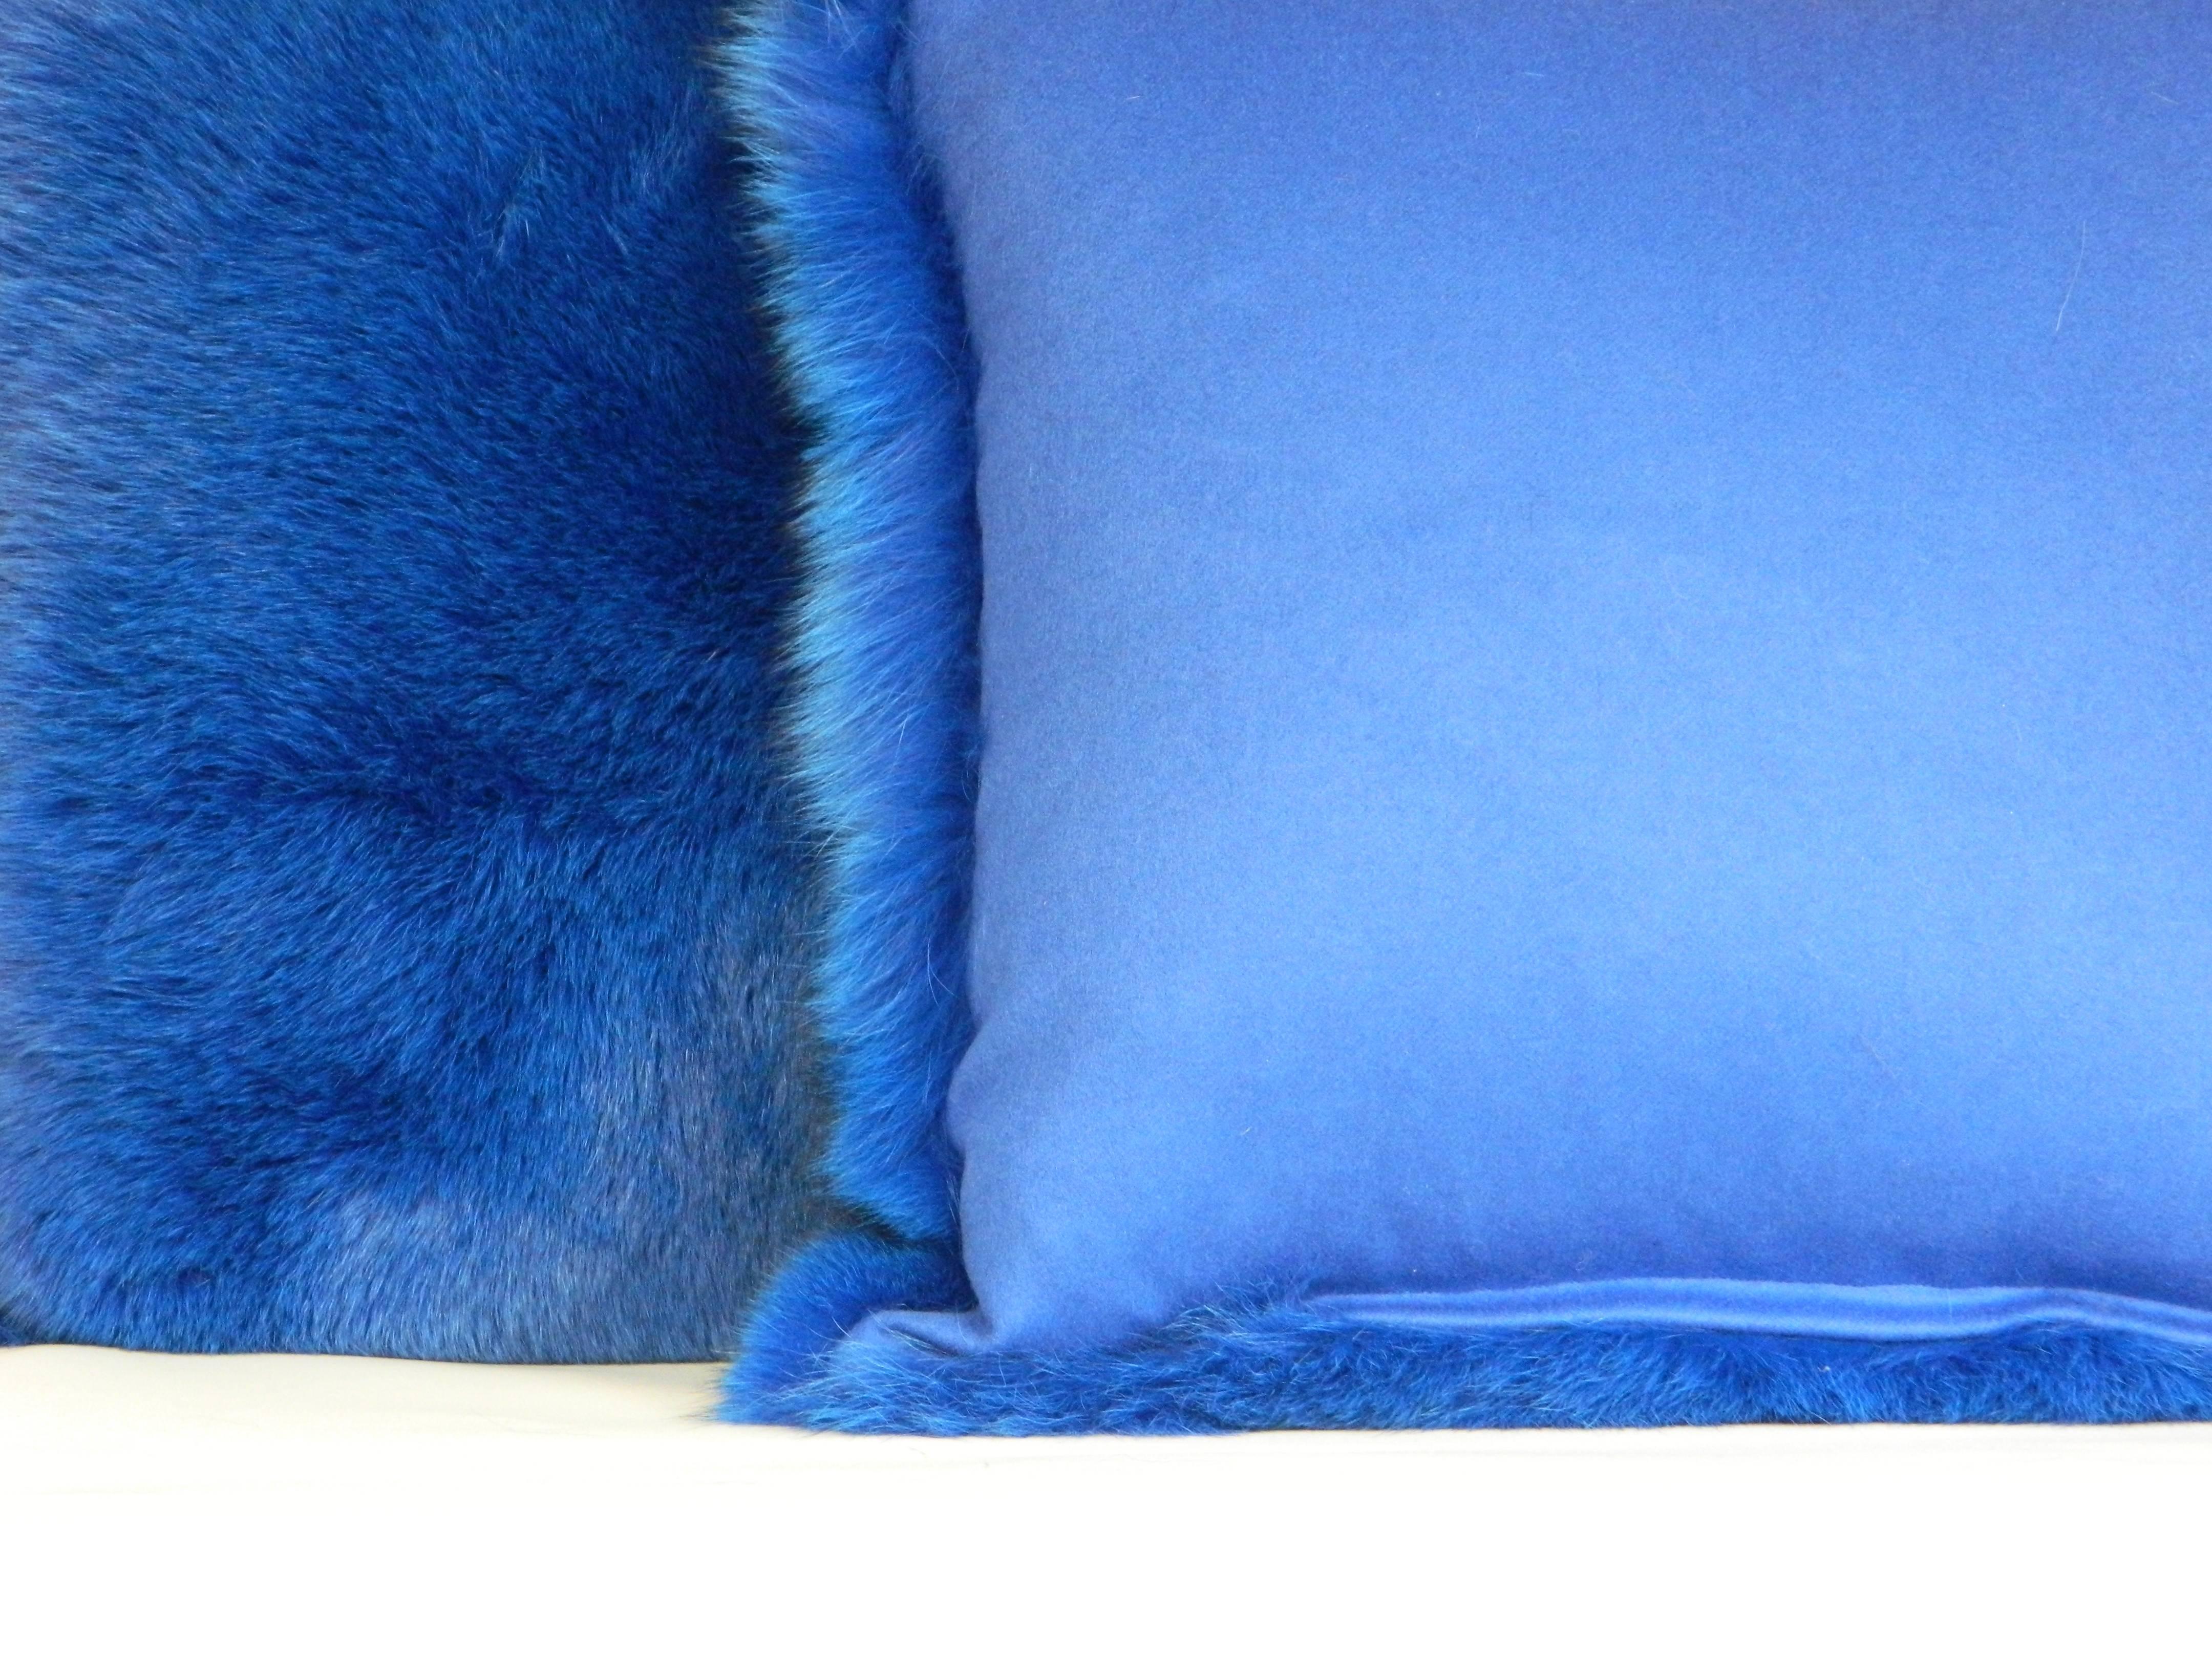 Exquisite Blue Fox pillow with Italian cashmere backing 
Custom size and colors are available, please contact us for more information